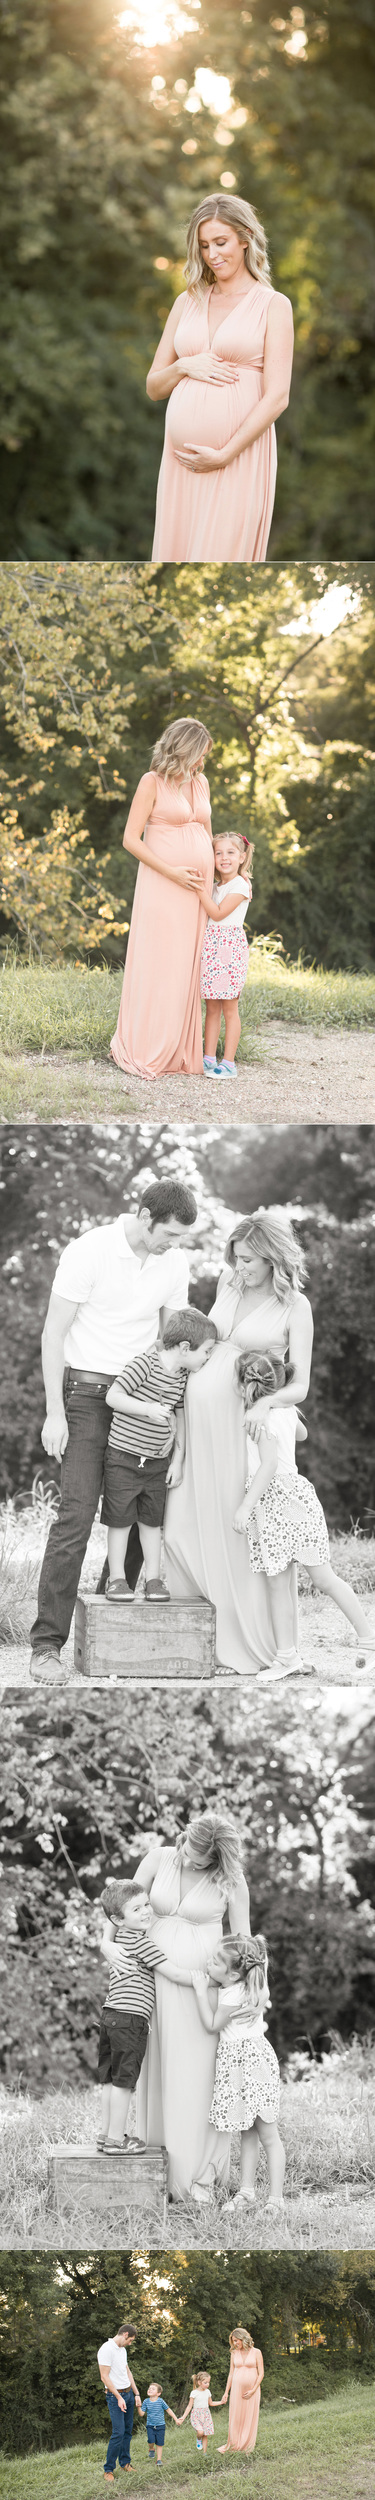 Houston maternity session outdoors